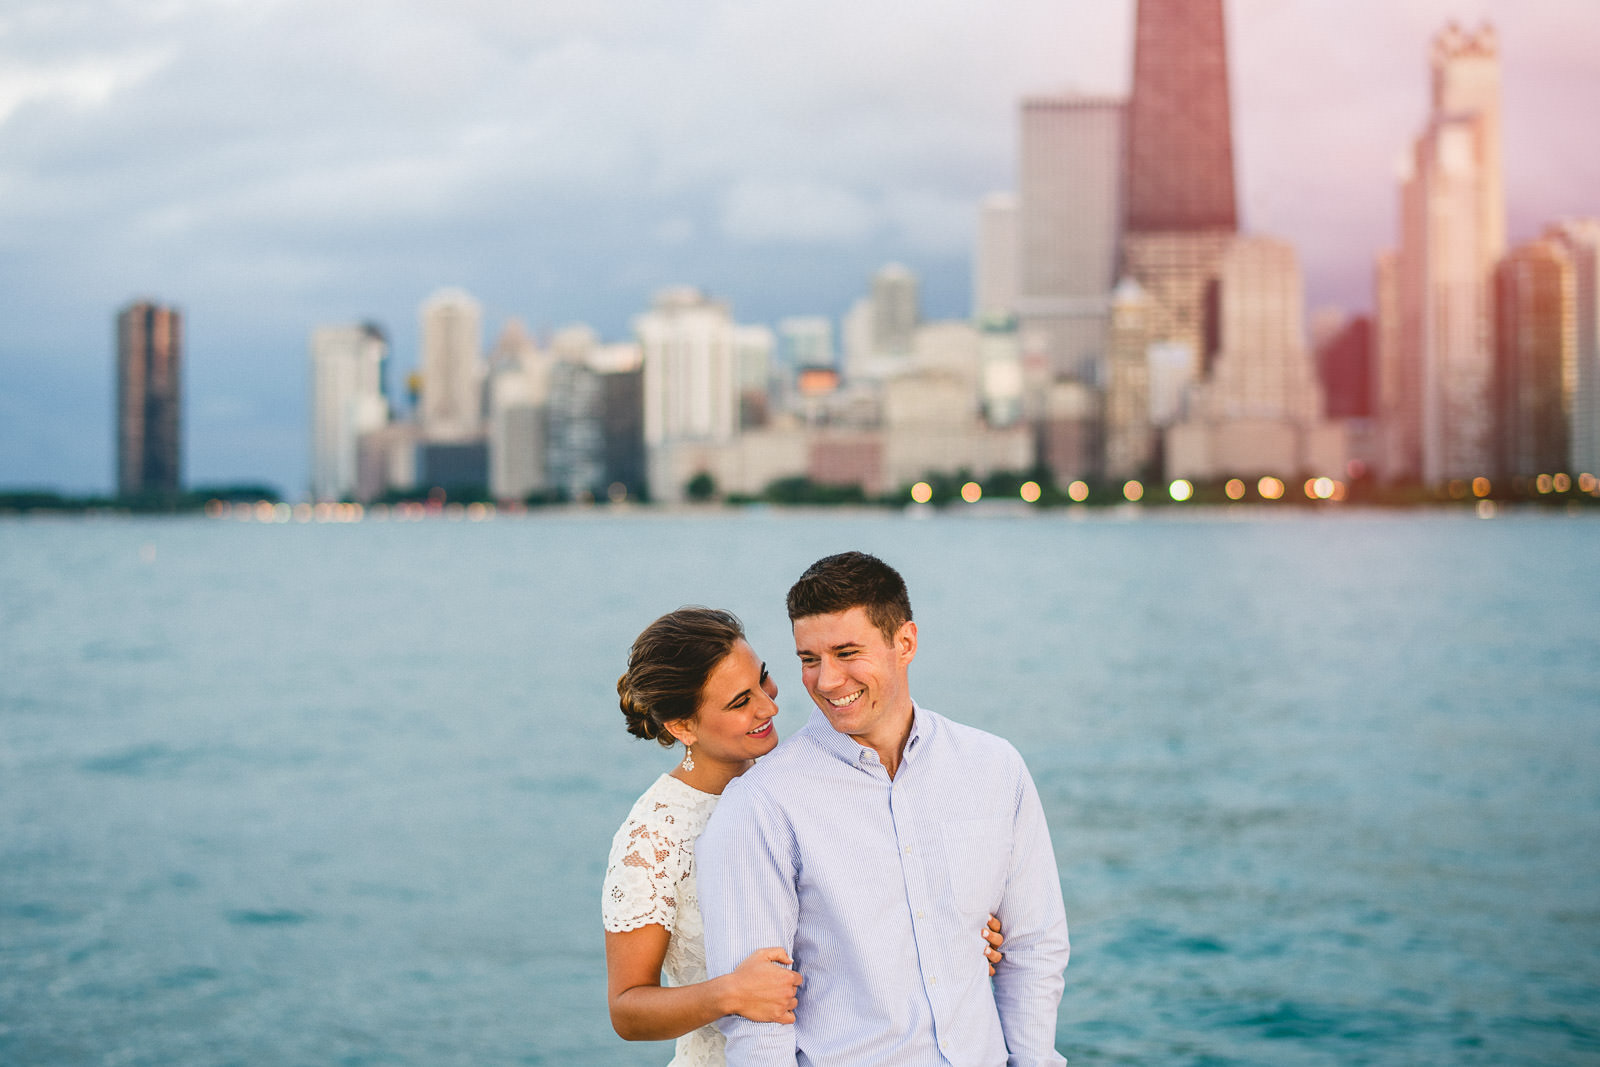 19 best lincoln park engagemet spots - Lincoln Park Engagement Photos // Mary + Colin